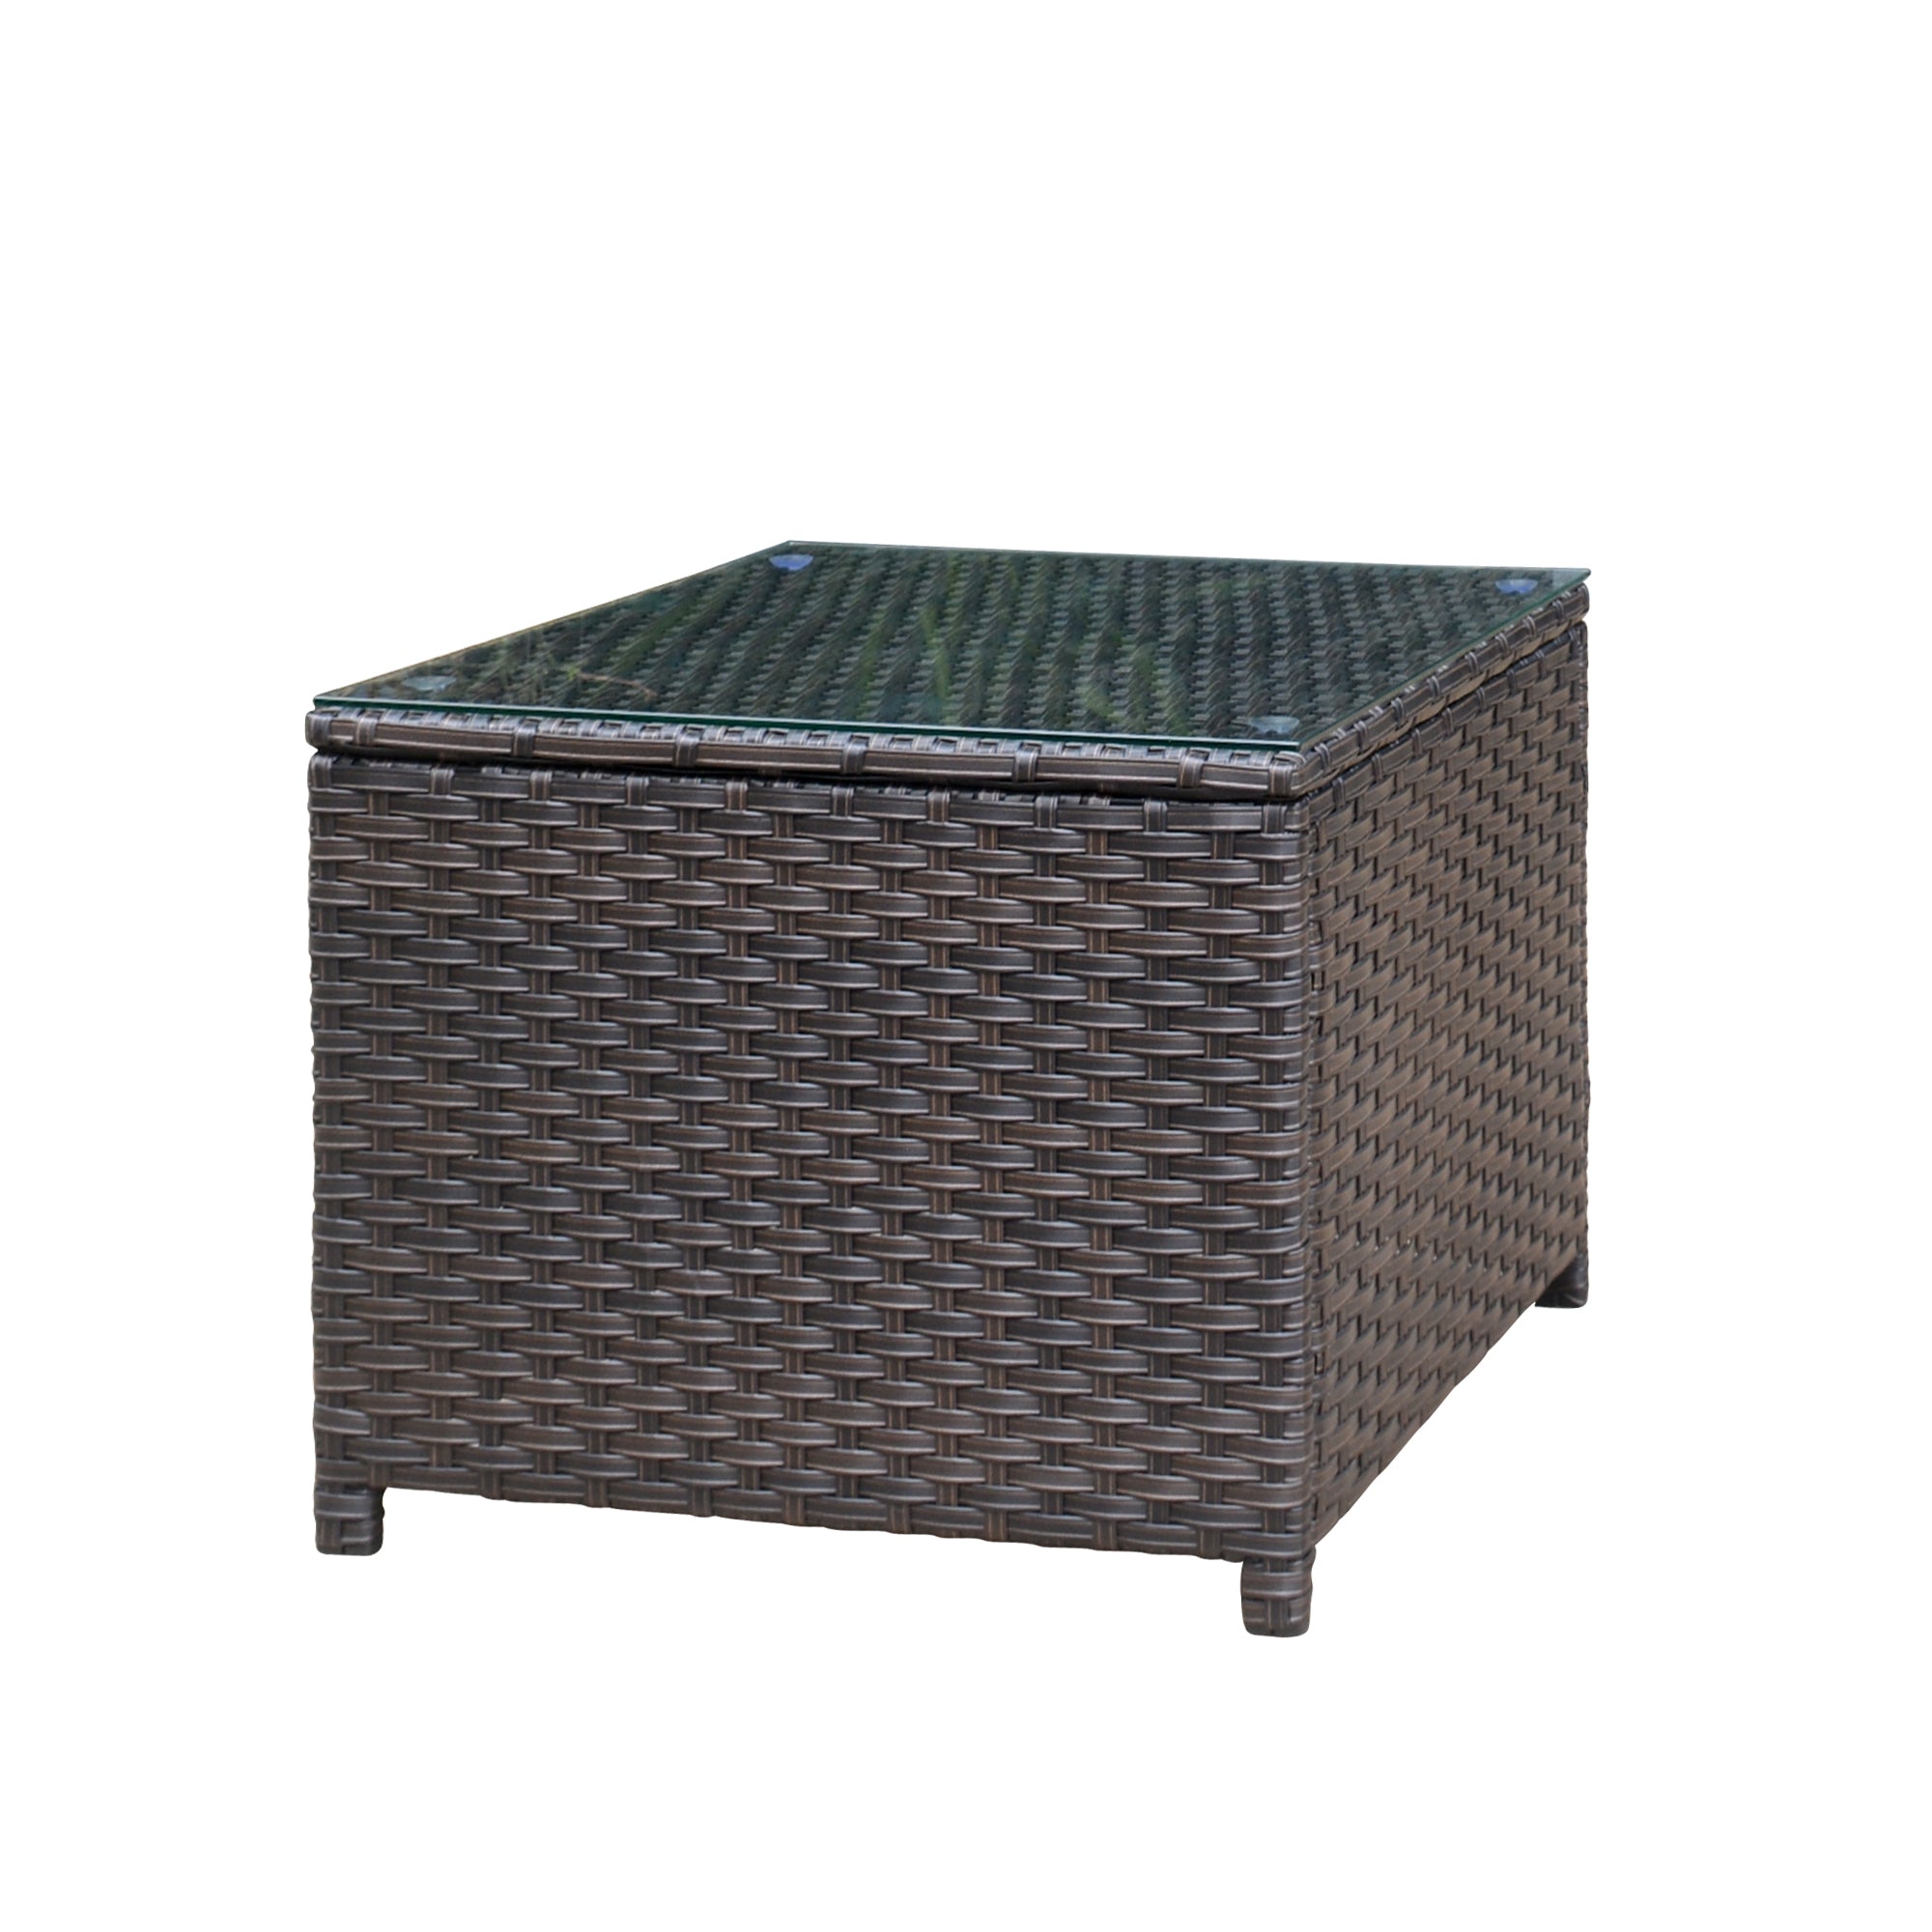 Ovios Brown Wicker Table with Glass Top for NTC Series